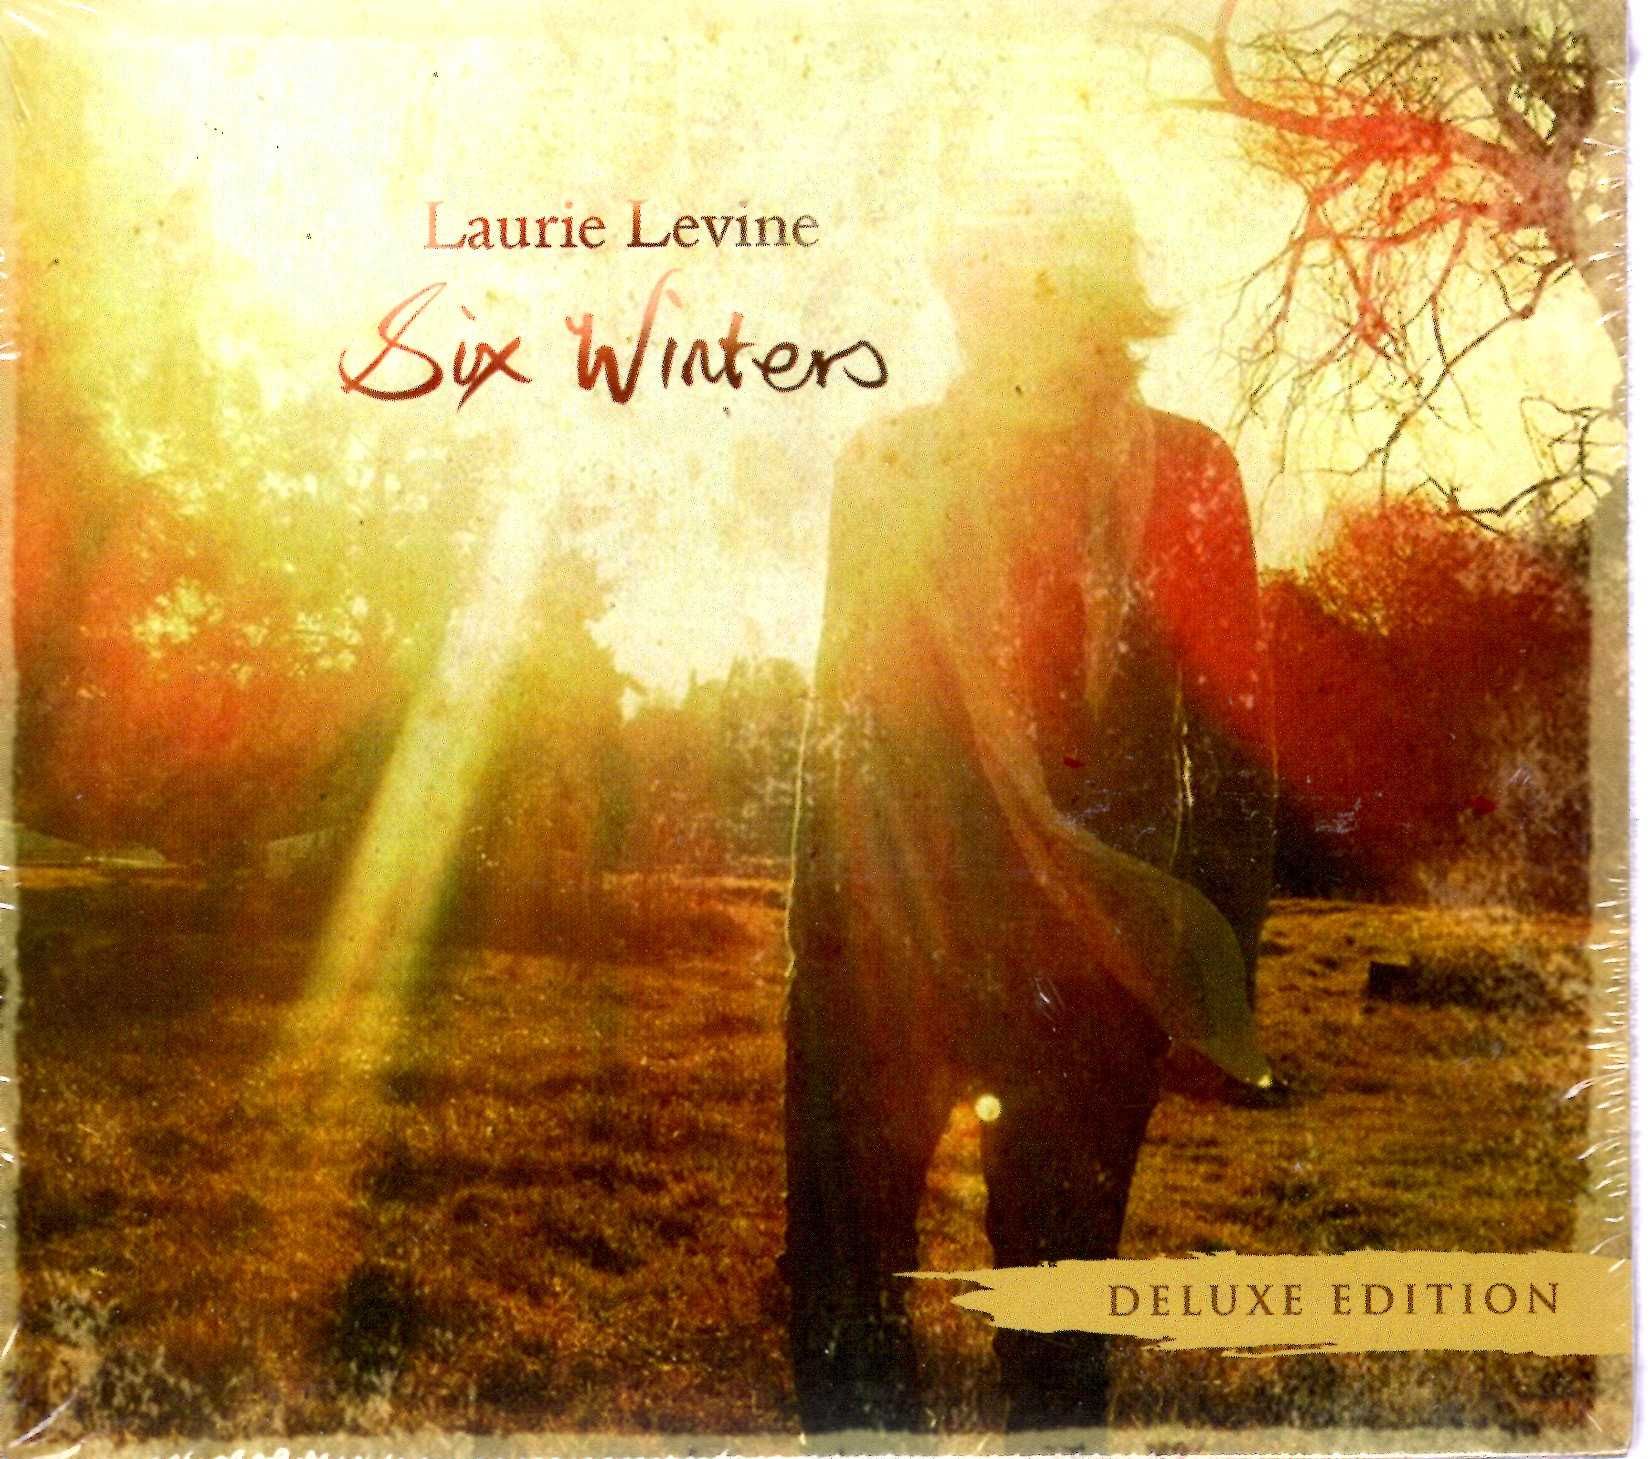 Laurie Levine - Six Winters (Deluxe Edition) (CD)